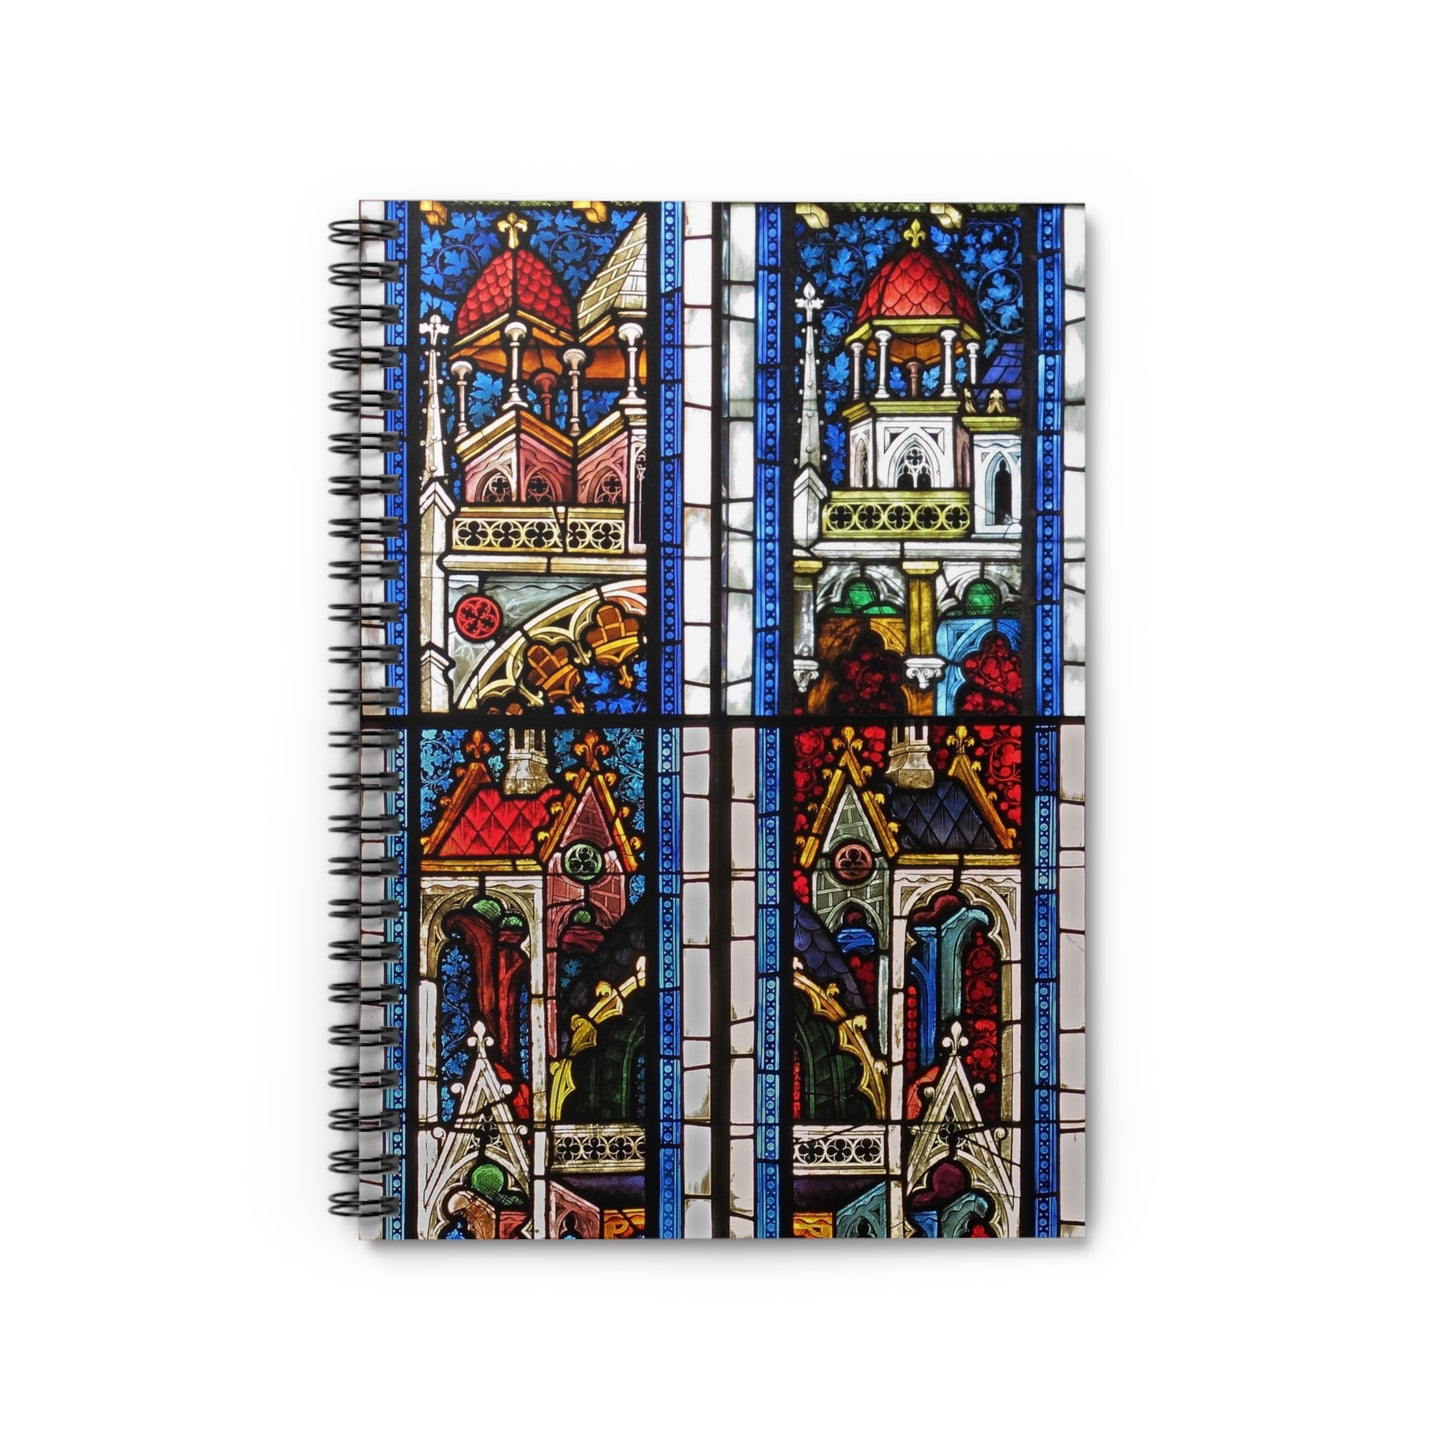 14th Century Stained Glass Spiral Notebook - Ruled Line